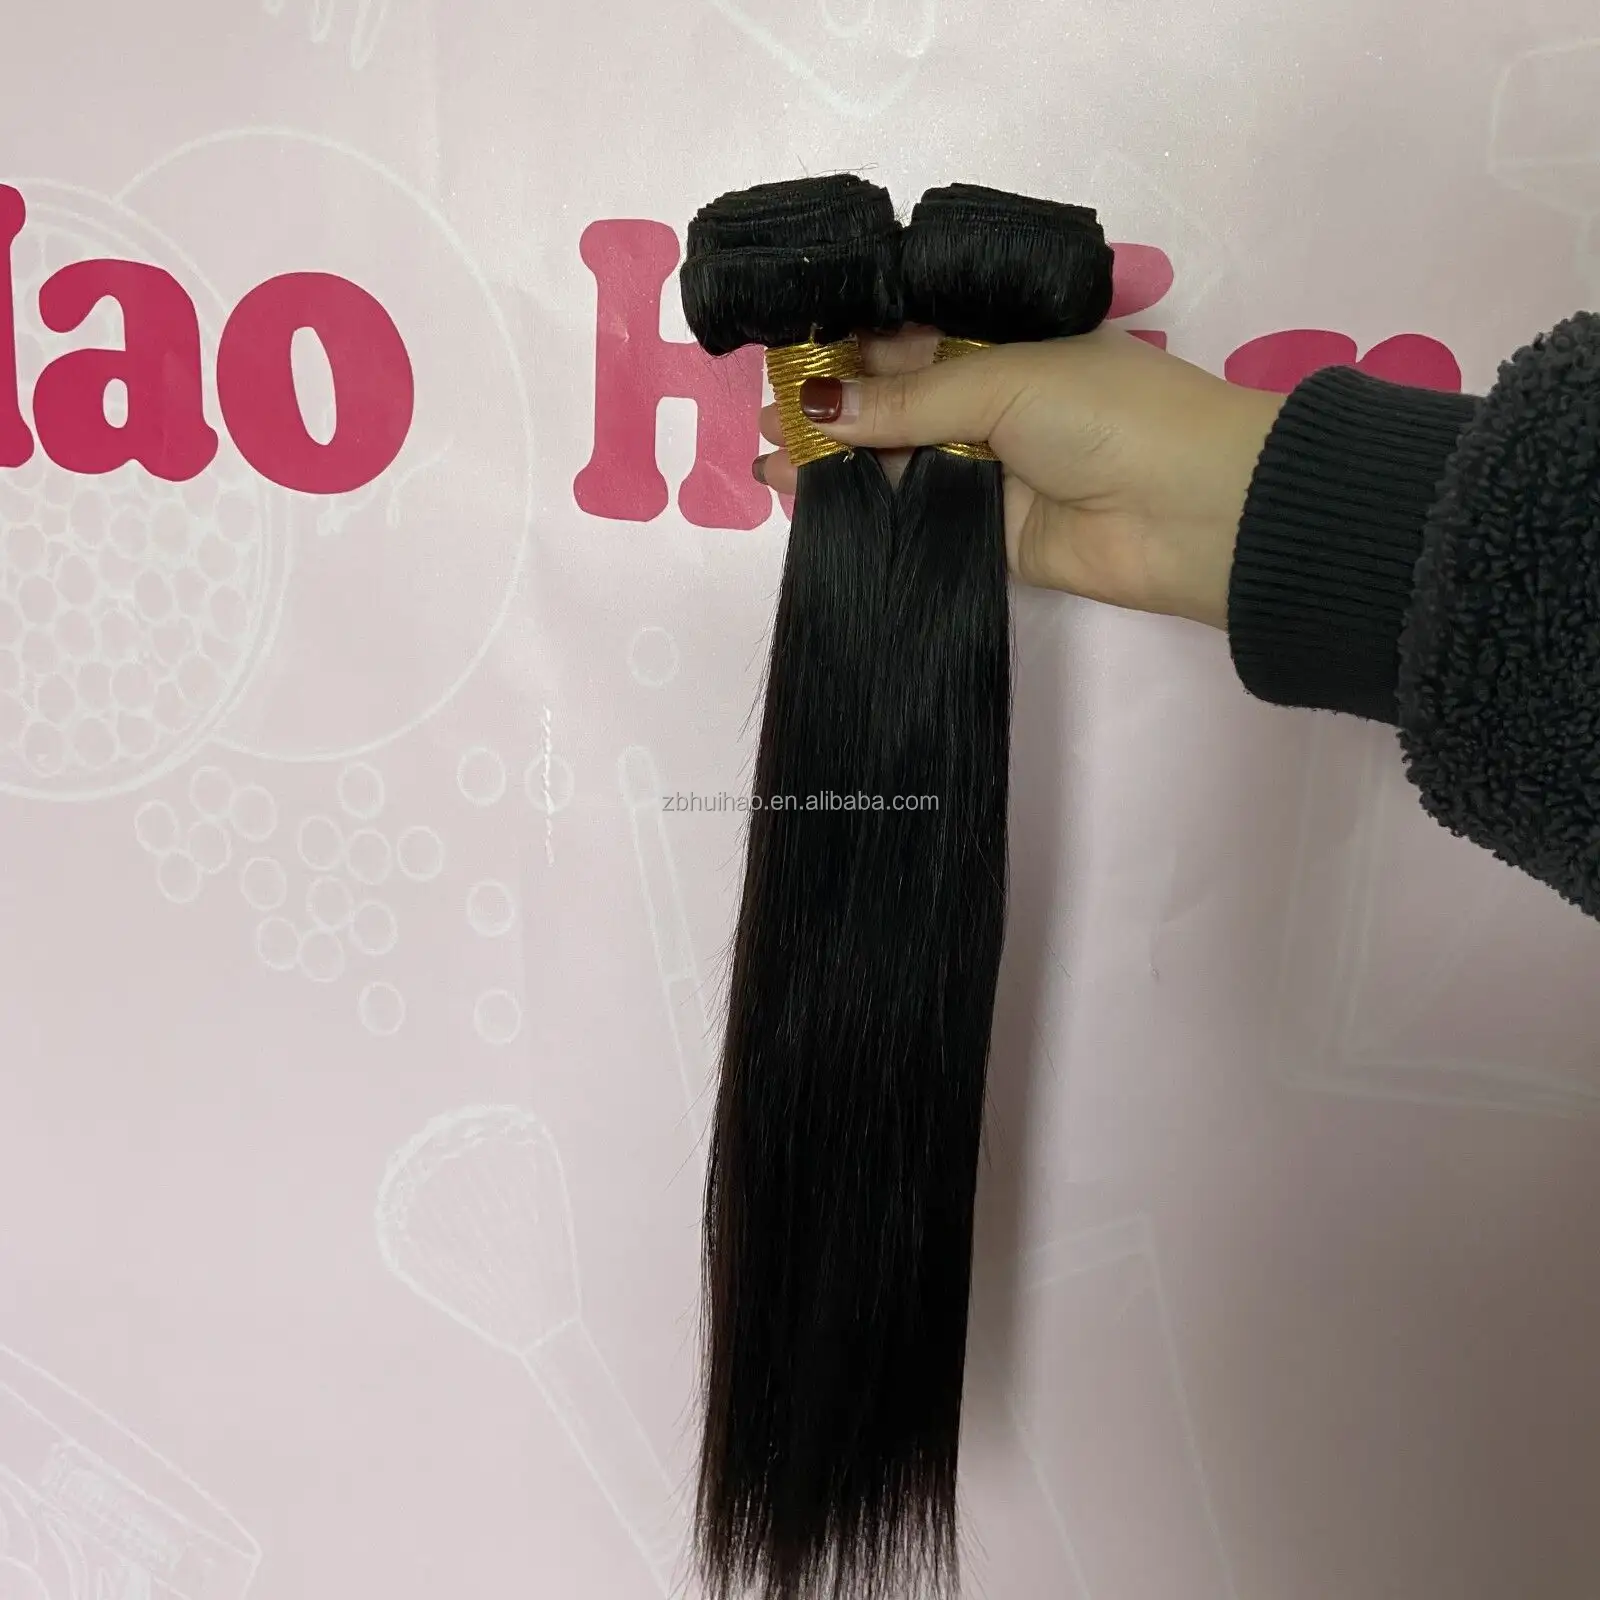 Body wave bundles human hair wet and wavy human hair bundles burmese hair bundles